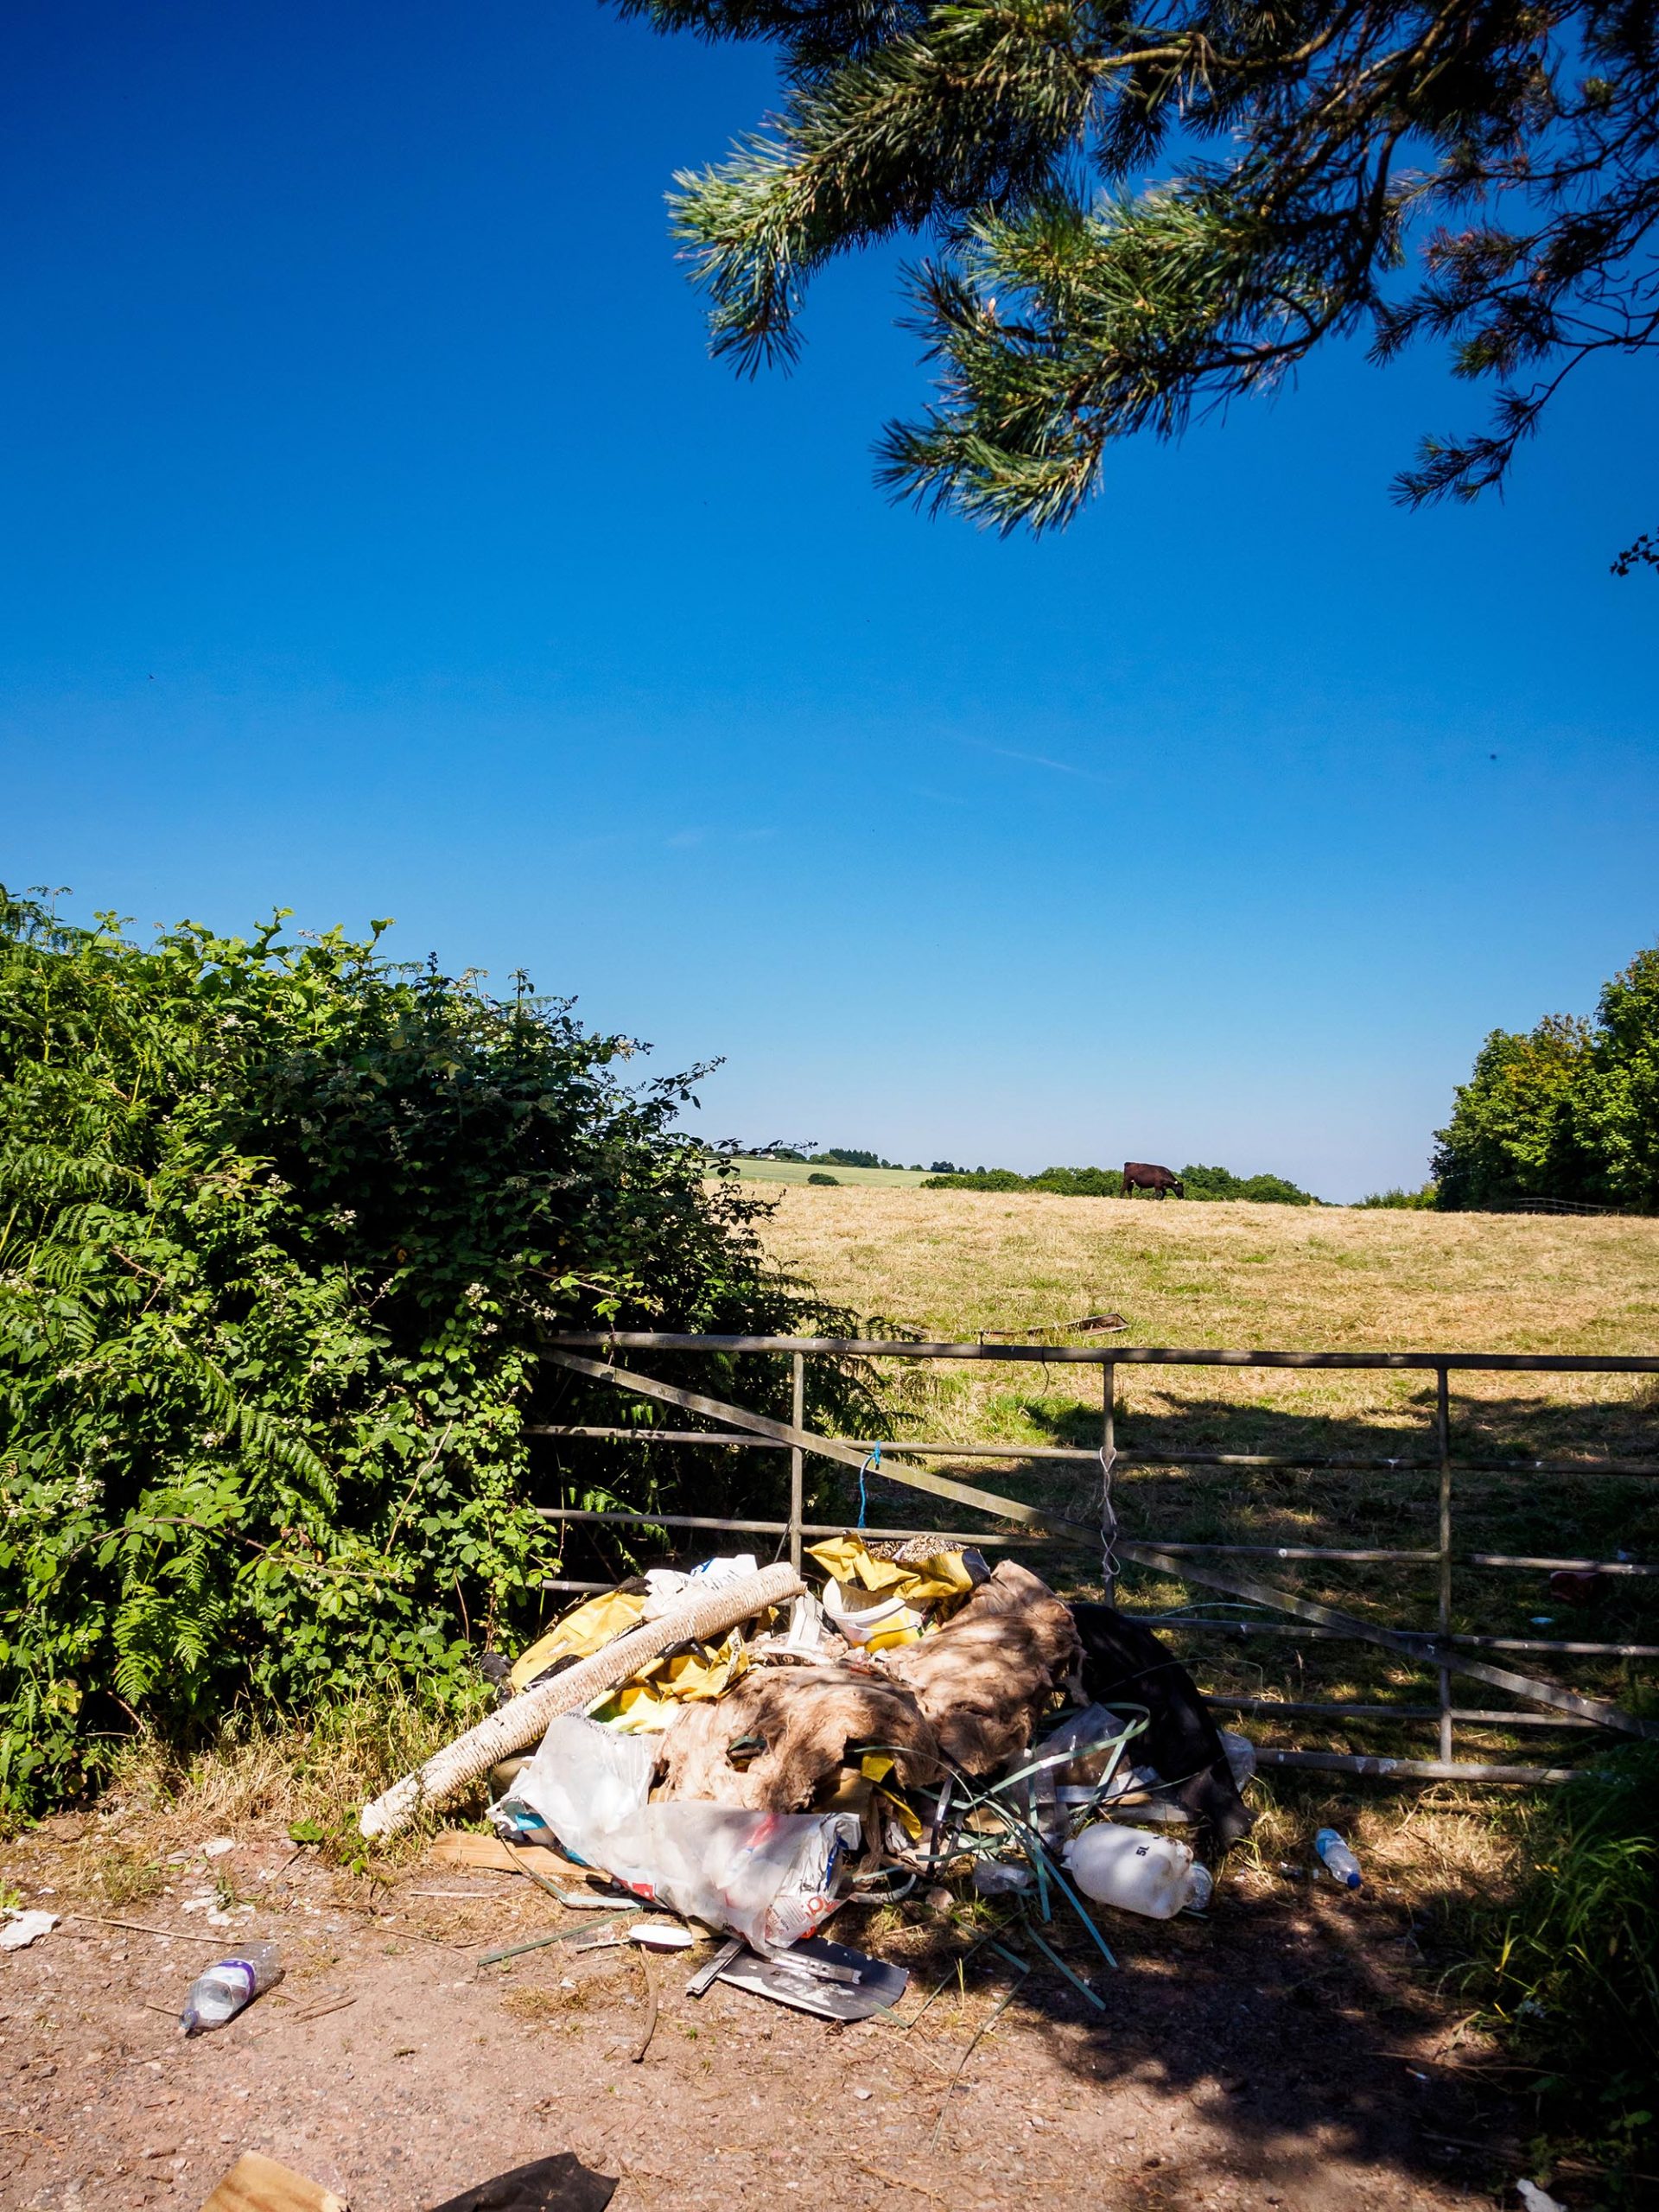 Fly-tipped household furniture, clearance and industrial waste dumped in the countryside